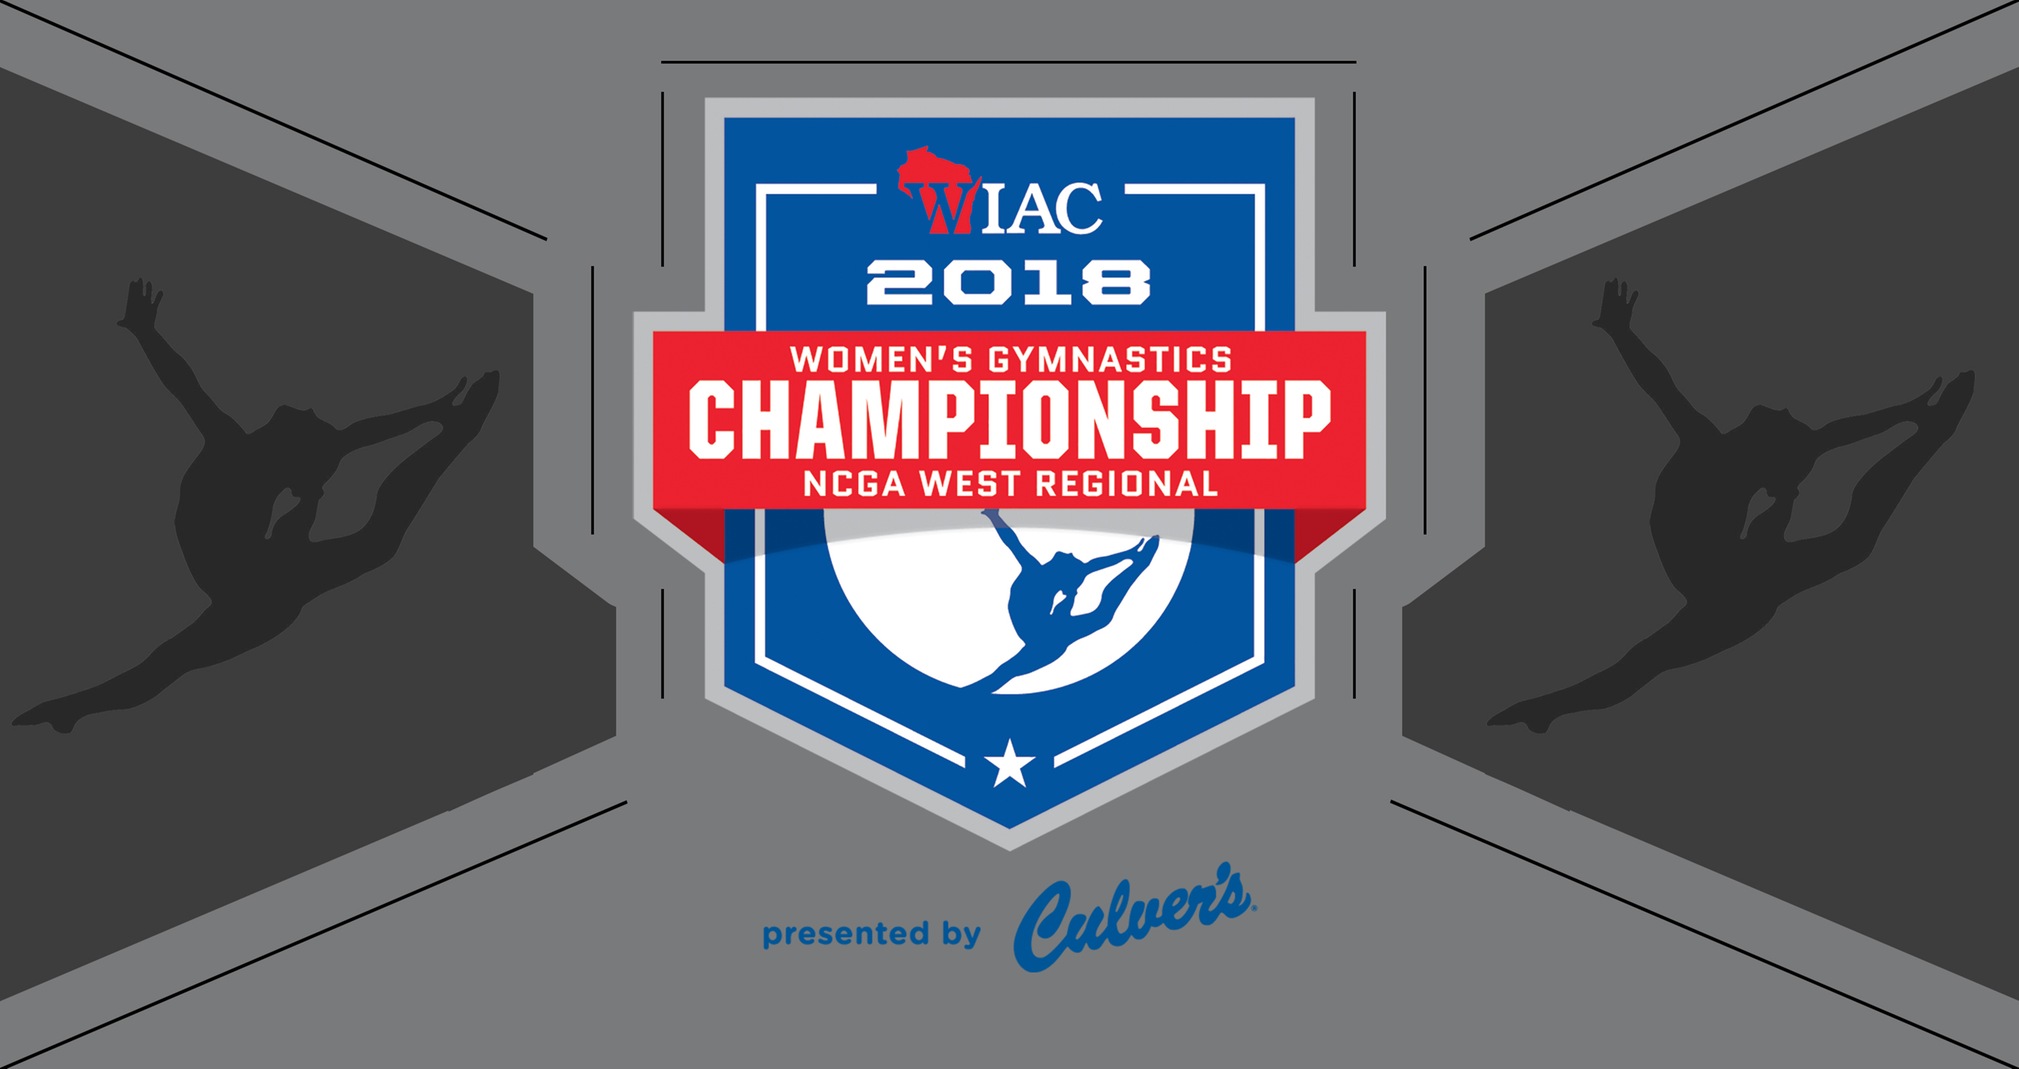 Titans To Perform Routines At WIAC Championship